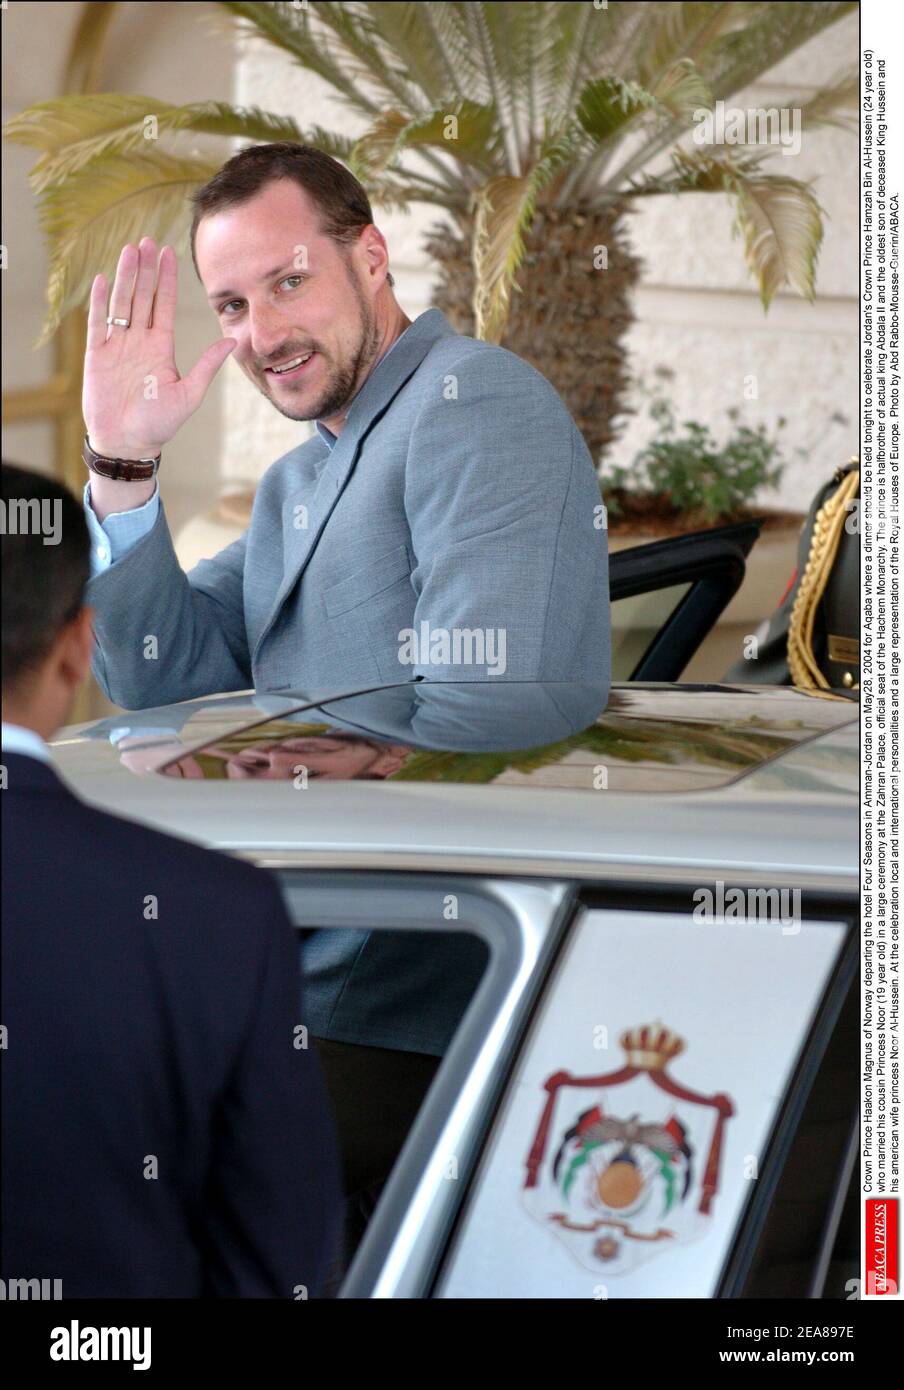 Crown Prince Haakon Magnus of Norway departing the hotel Four Seasons in Amman-Jordan on May28, 2004 for Aqaba where a dinner should be held tonight to celebrate Jordan's Crown Prince Hamzah Bin Al-Hussein (24 year old) who married his cousin Princess Noor (19 year old) in a large ceremony at the Zahran Palace, official seat of the Hachem Monarchy. The prince is halfbrother of actual king Abdala II and the oldest son of deceased King Hussein and his american wife princess Noor Al-Hussein. At the celebration local and international personalities and a large representation of the Royal Houses of Stock Photo